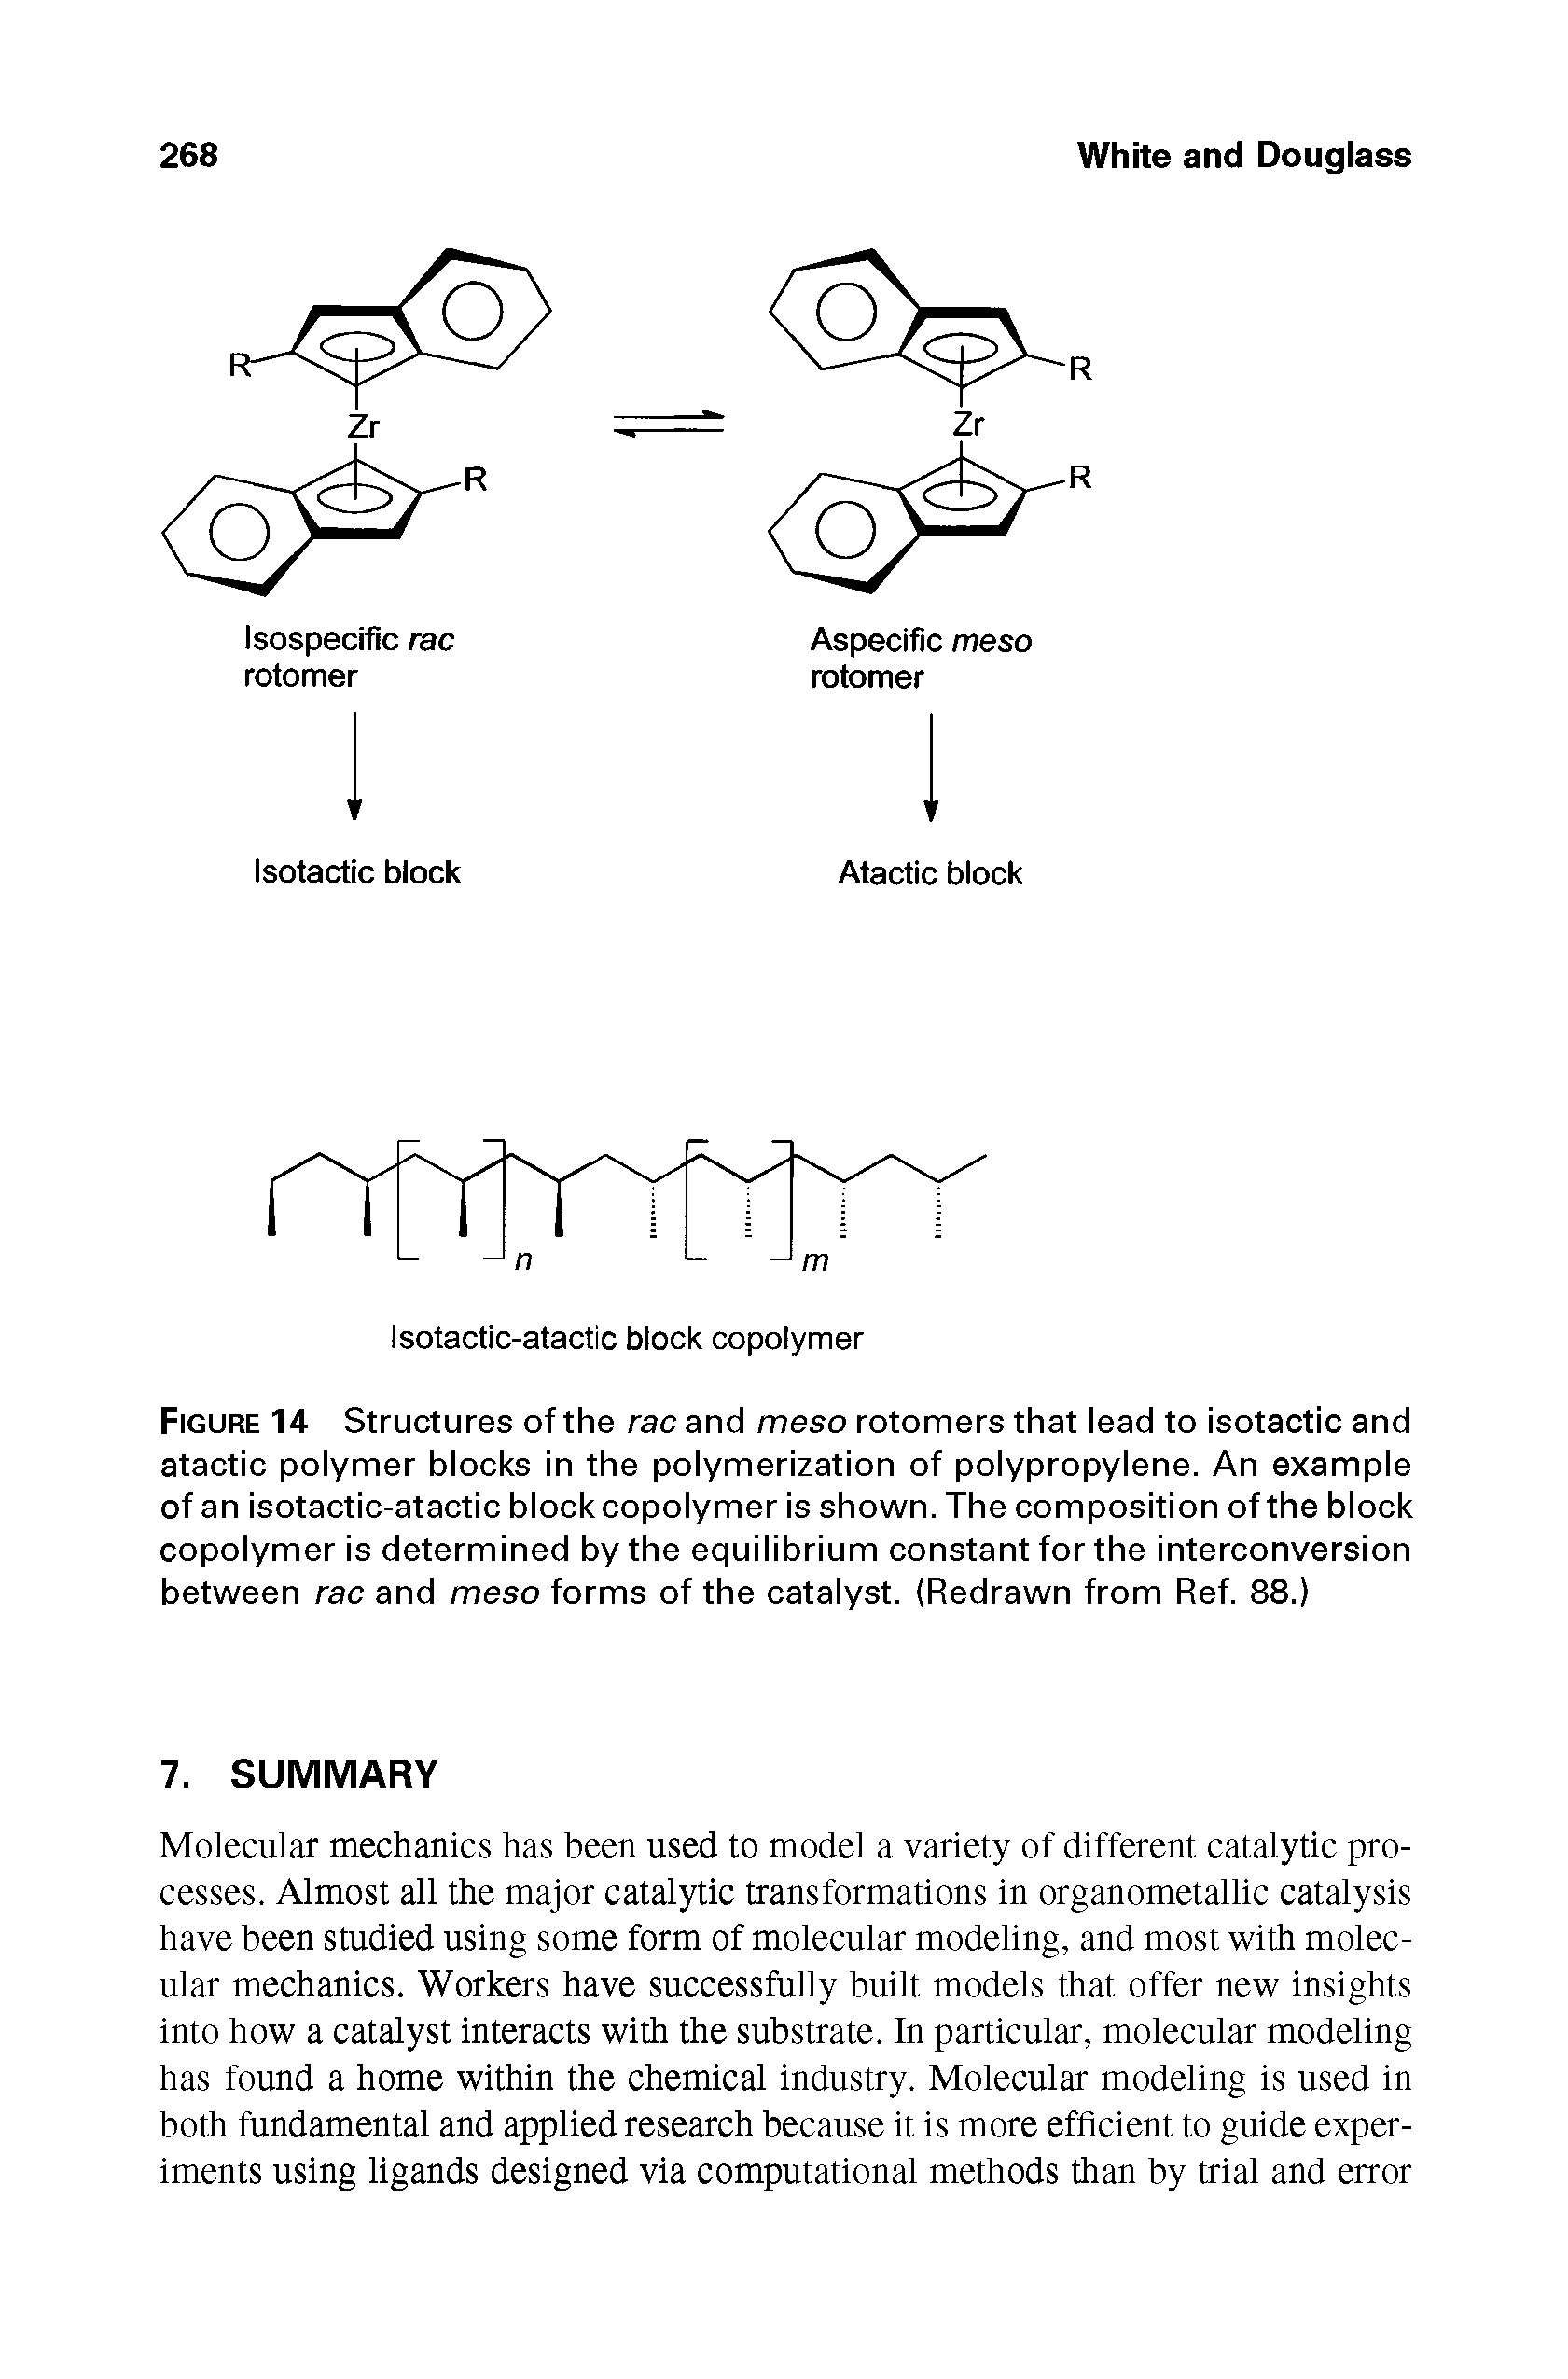 Figure 14 Structures of the rac and meso rotomers that lead to isotactic and atactic polymer blocks in the polymerization of polypropylene. An example of an isotactic-atactic block copolymer is shown. The composition of the block copolymer is determined by the equilibrium constant for the interconversion between rac and meso forms of the catalyst. (Redrawn from Ref. 88.)...